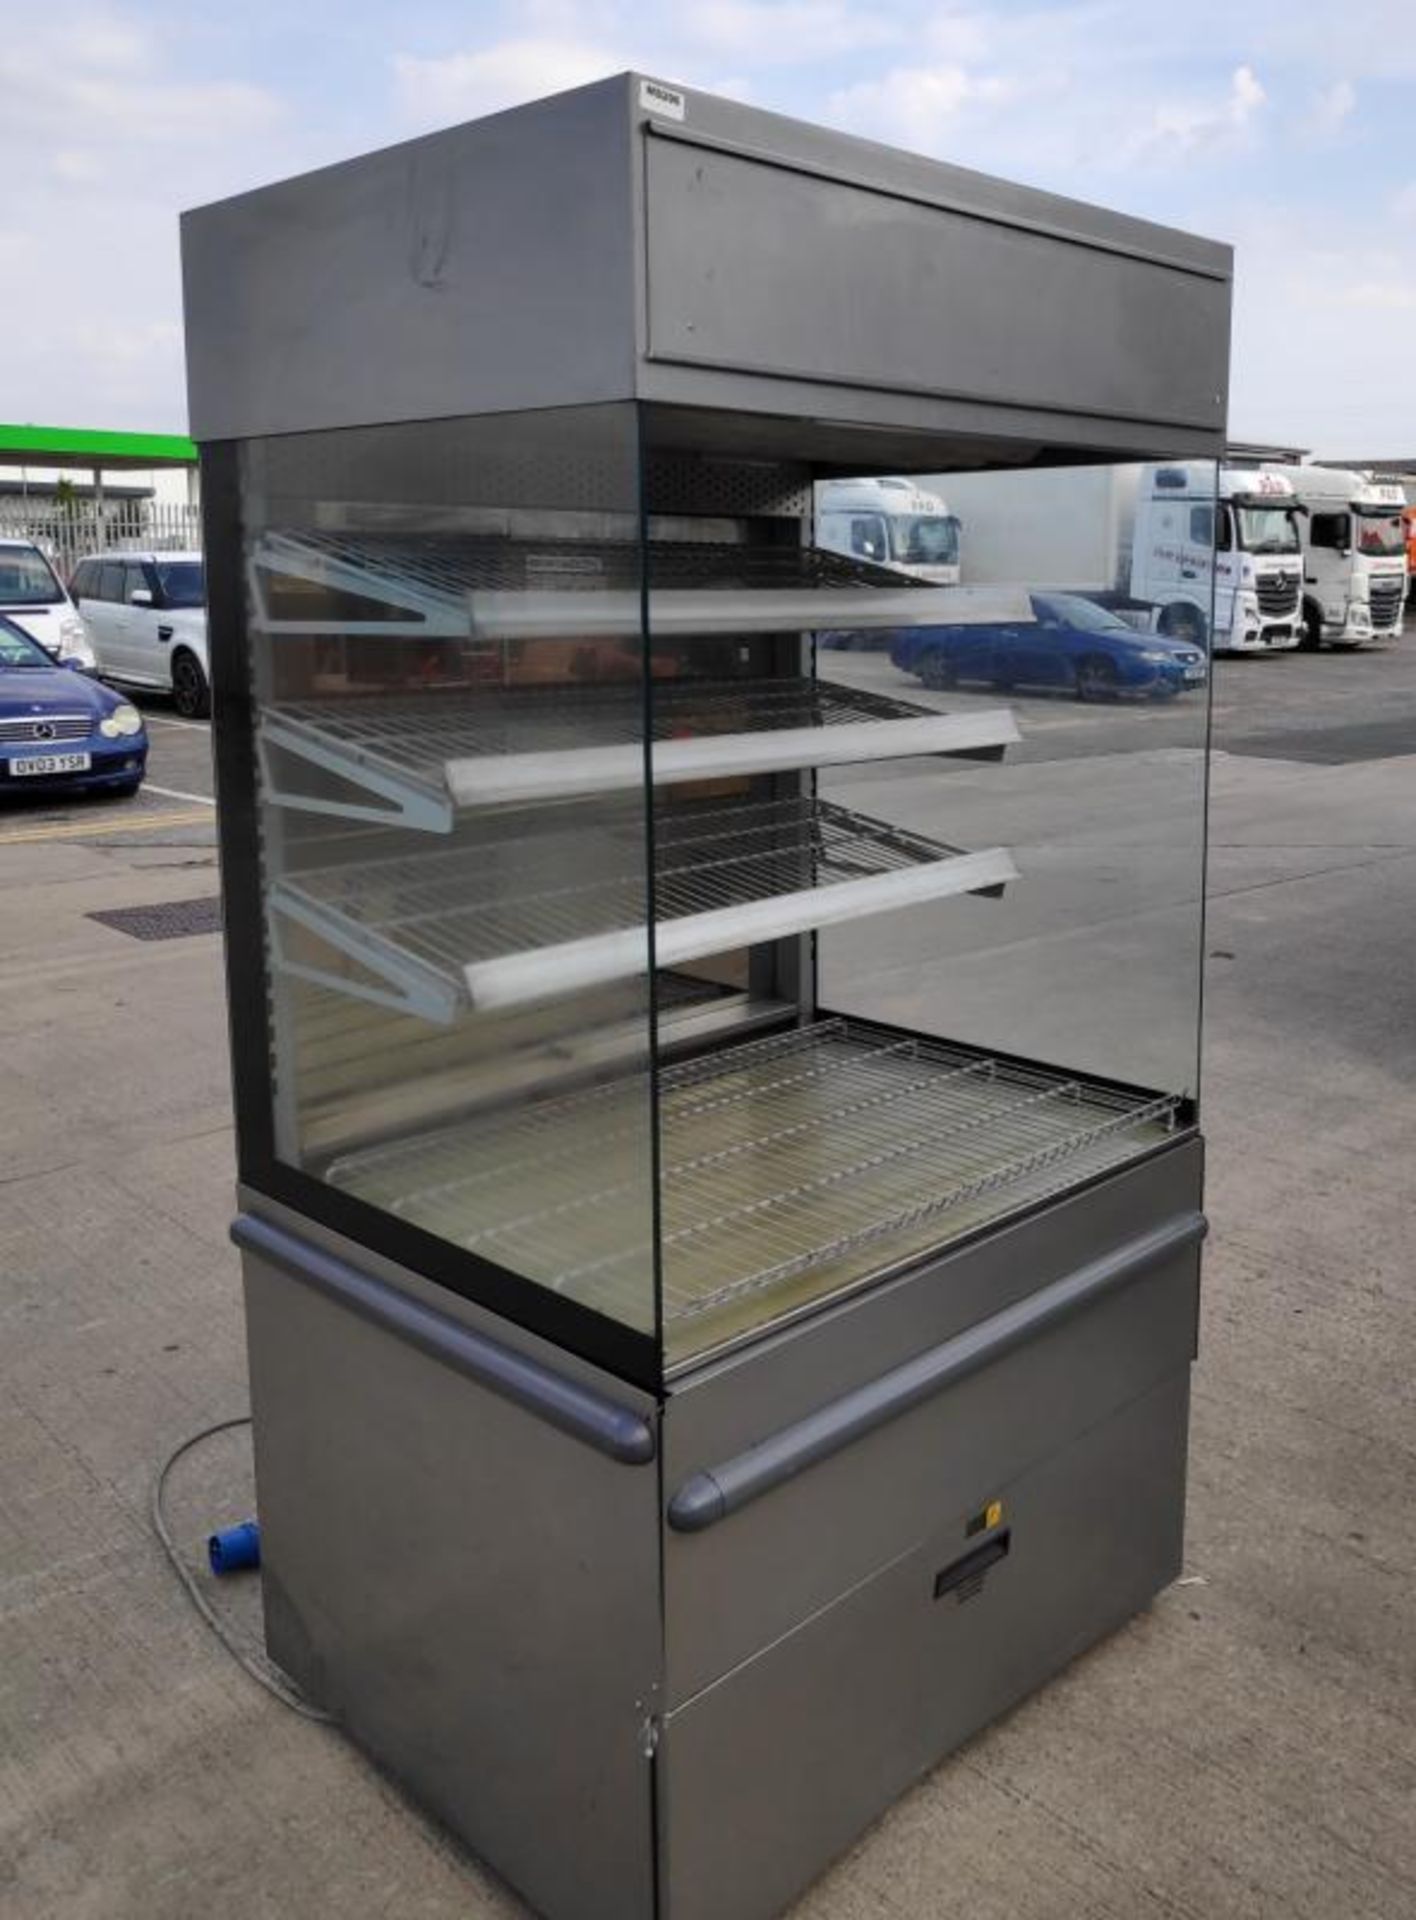 1 x Nuttall 4 Level Open Front Multideck Display Chiller - Wheeled - Dimensions: 196L x 89D x 107W c - Image 10 of 13